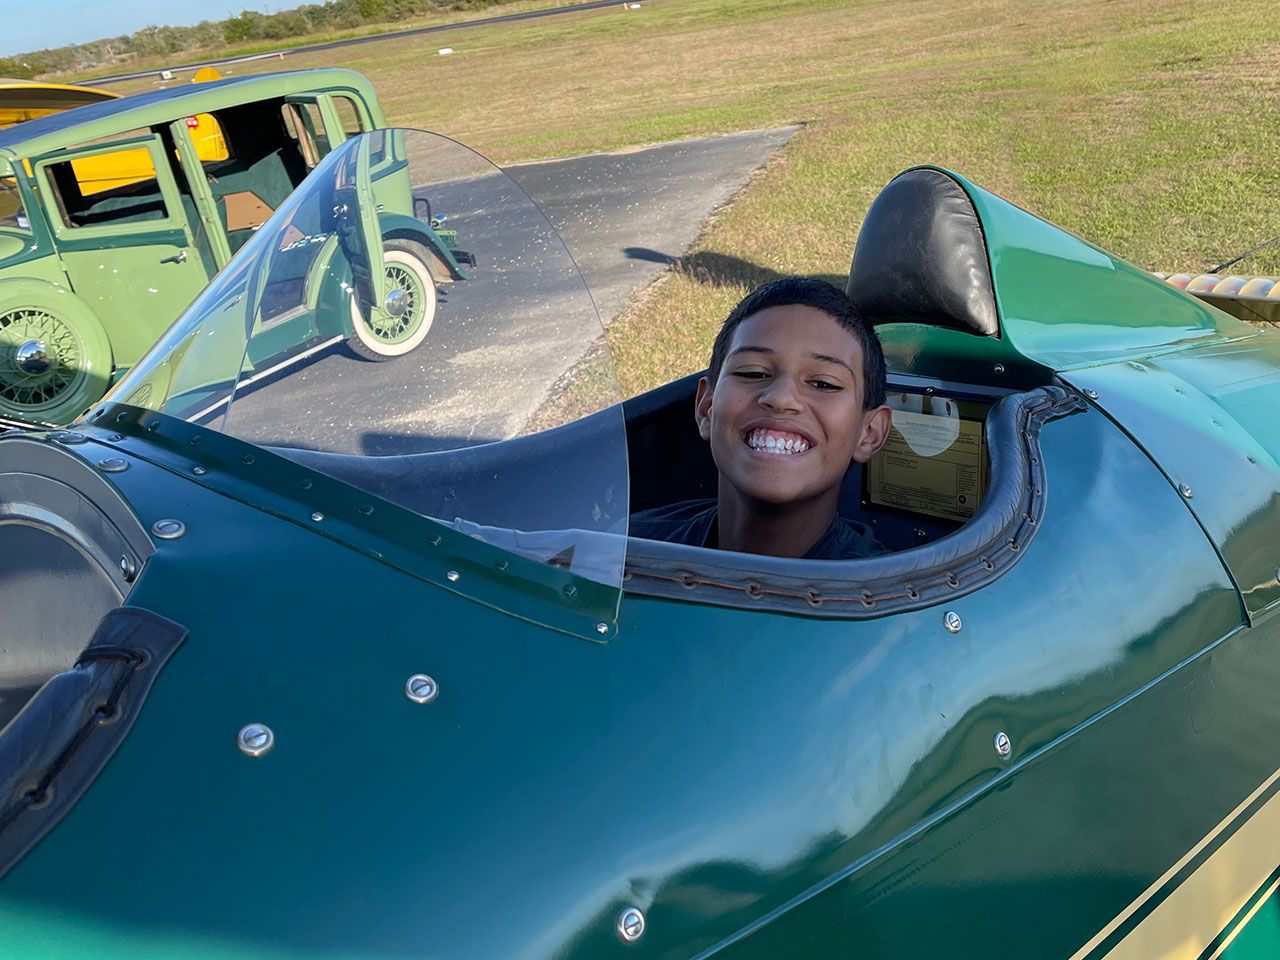 Smiling young latino boy in the cockpit of a green and yellow biplane